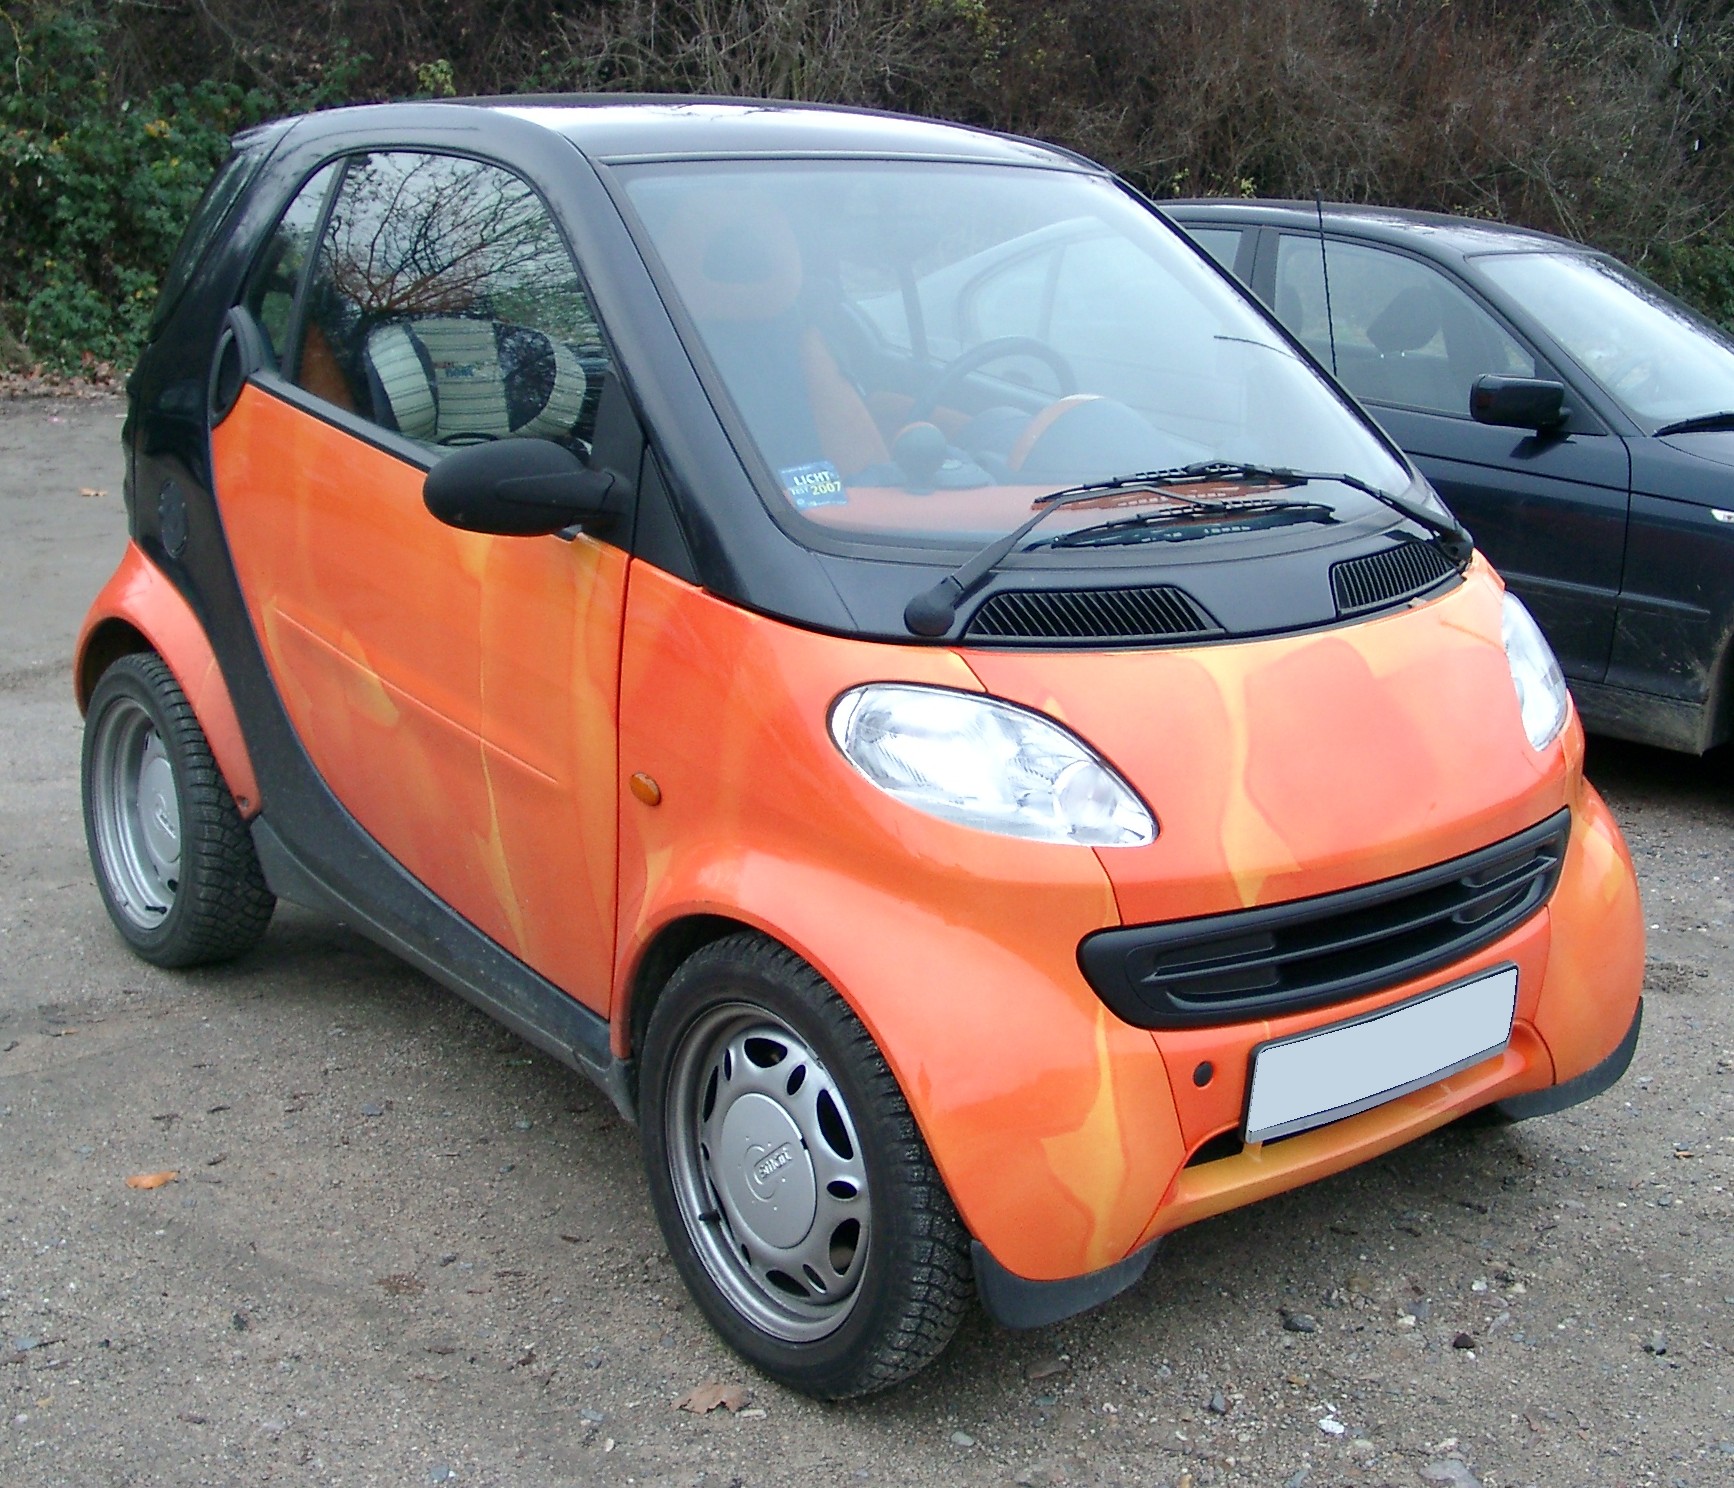 File:Smart Fortwo front 20071212.jpg - Wikimedia Commons